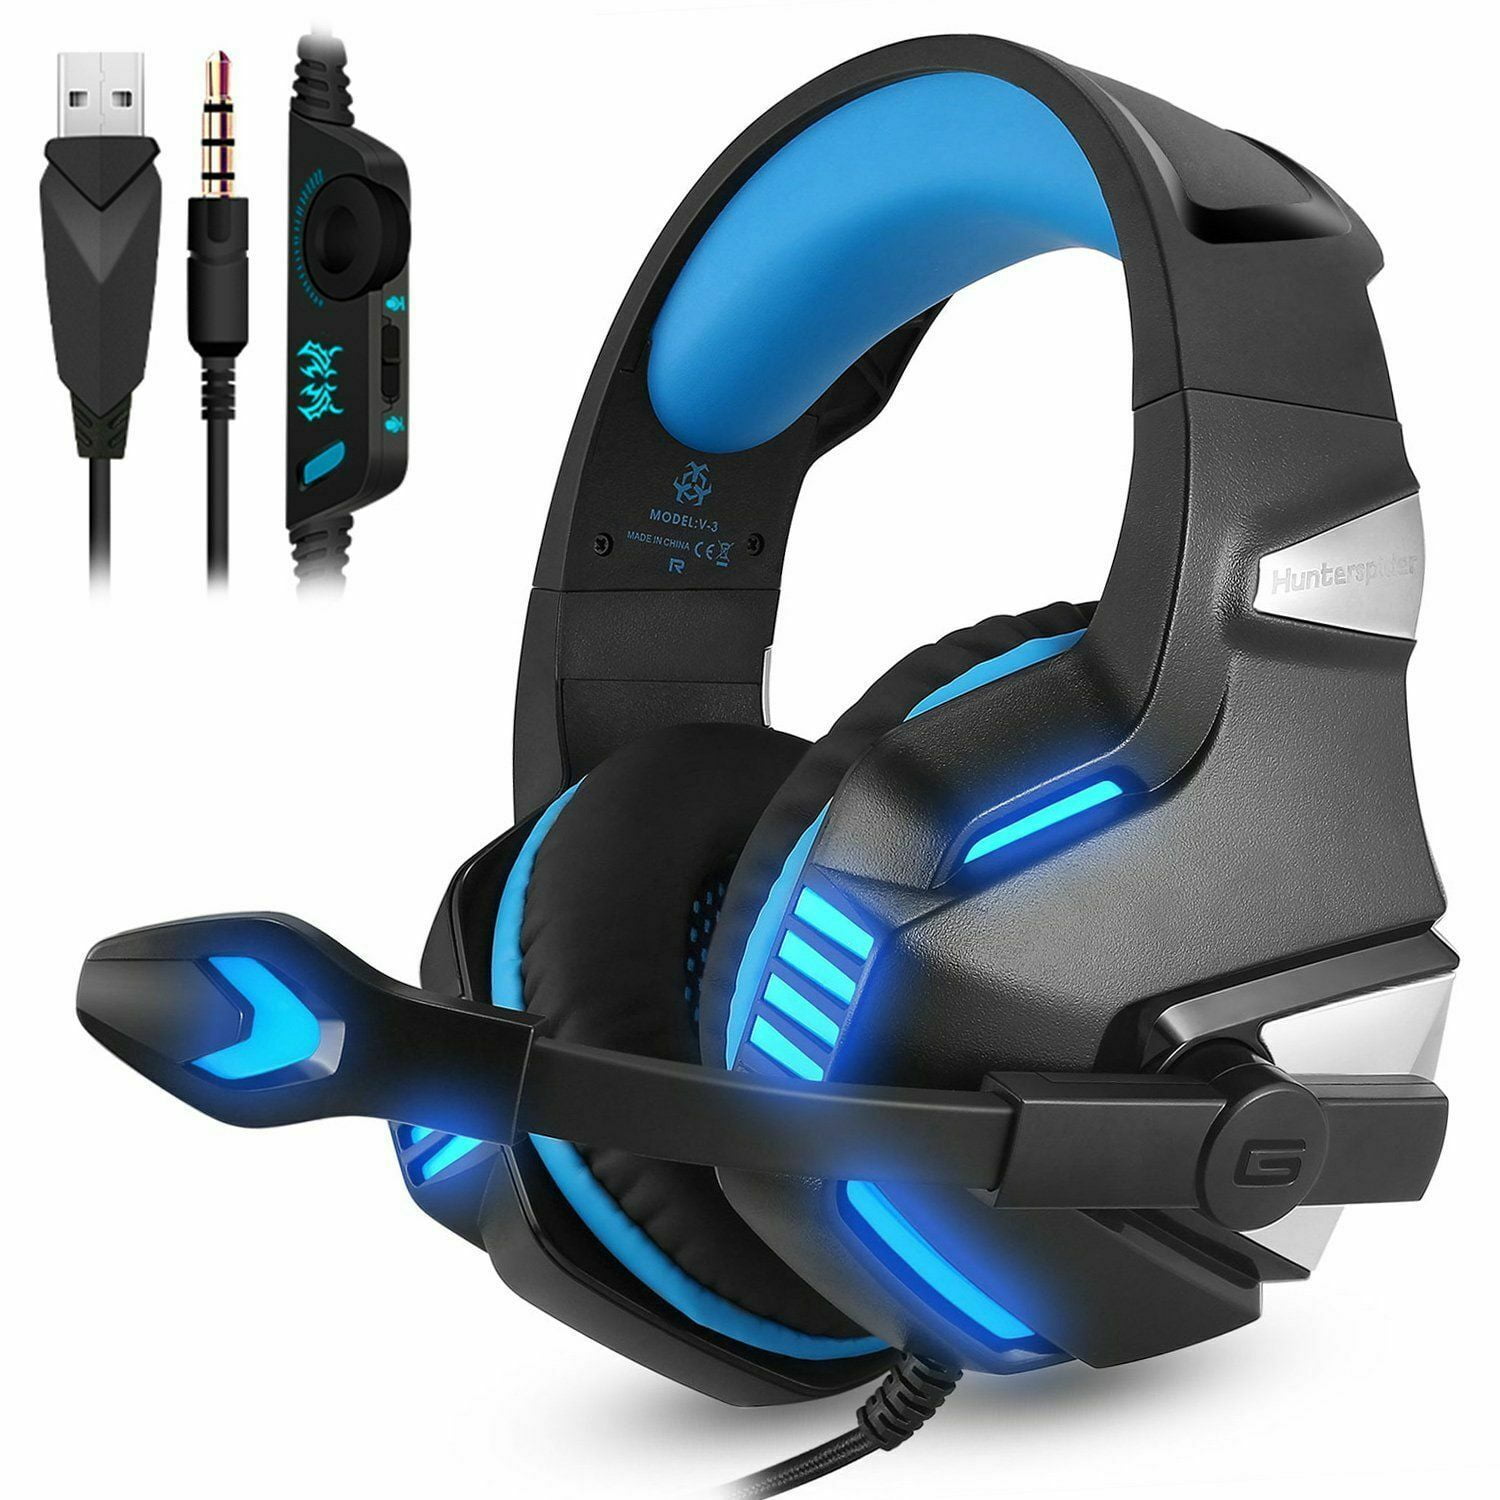 Gaming headset 3.5mm MIC LED Headphones for PC SW Laptop PS4 slim Xbox One X S